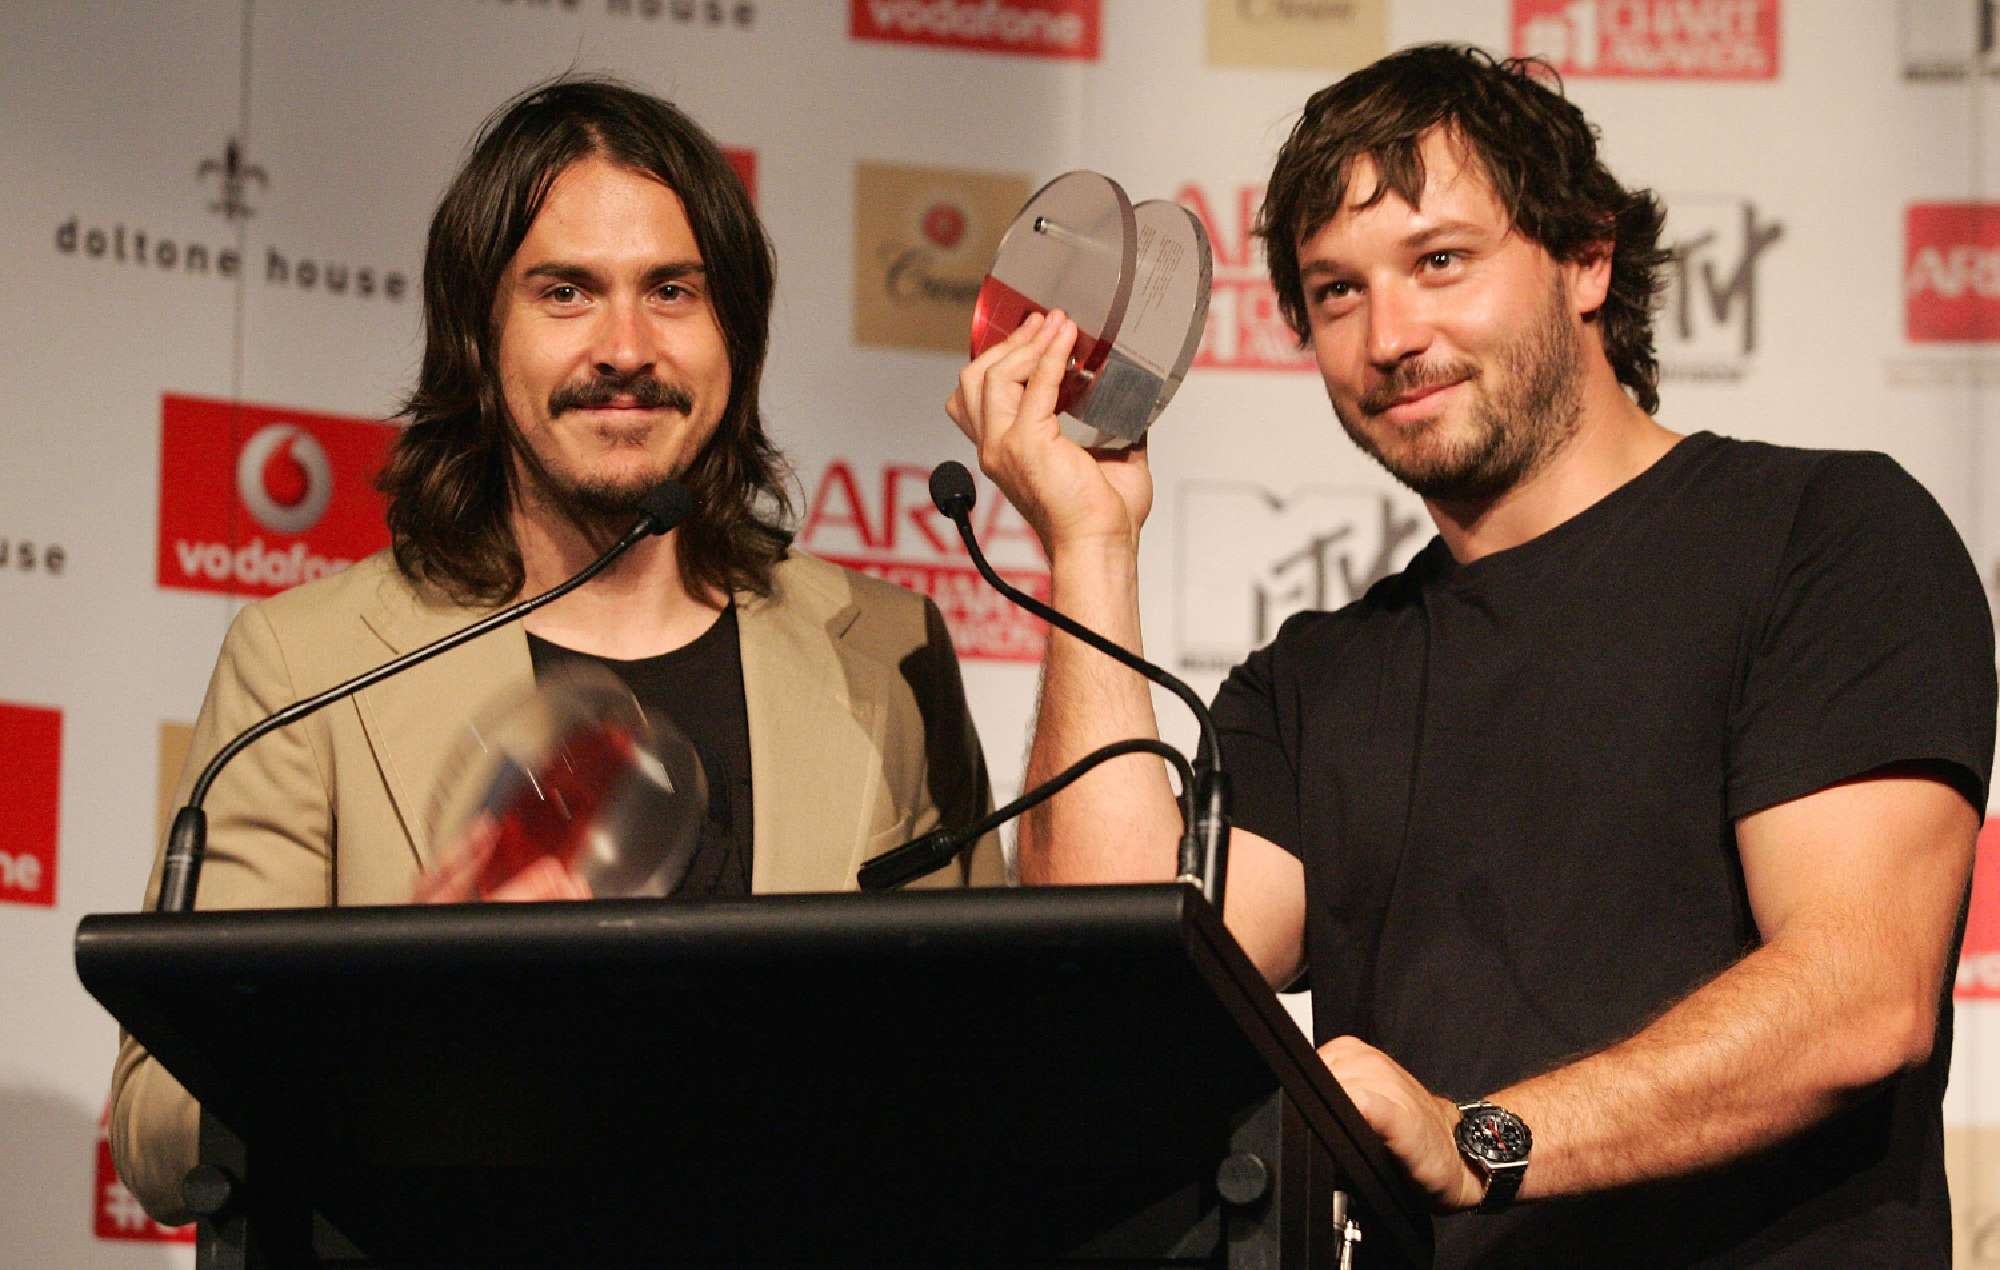 Silverchair’s Ben Gillies and Chris Joannou reveal mental health and drug addiction struggles